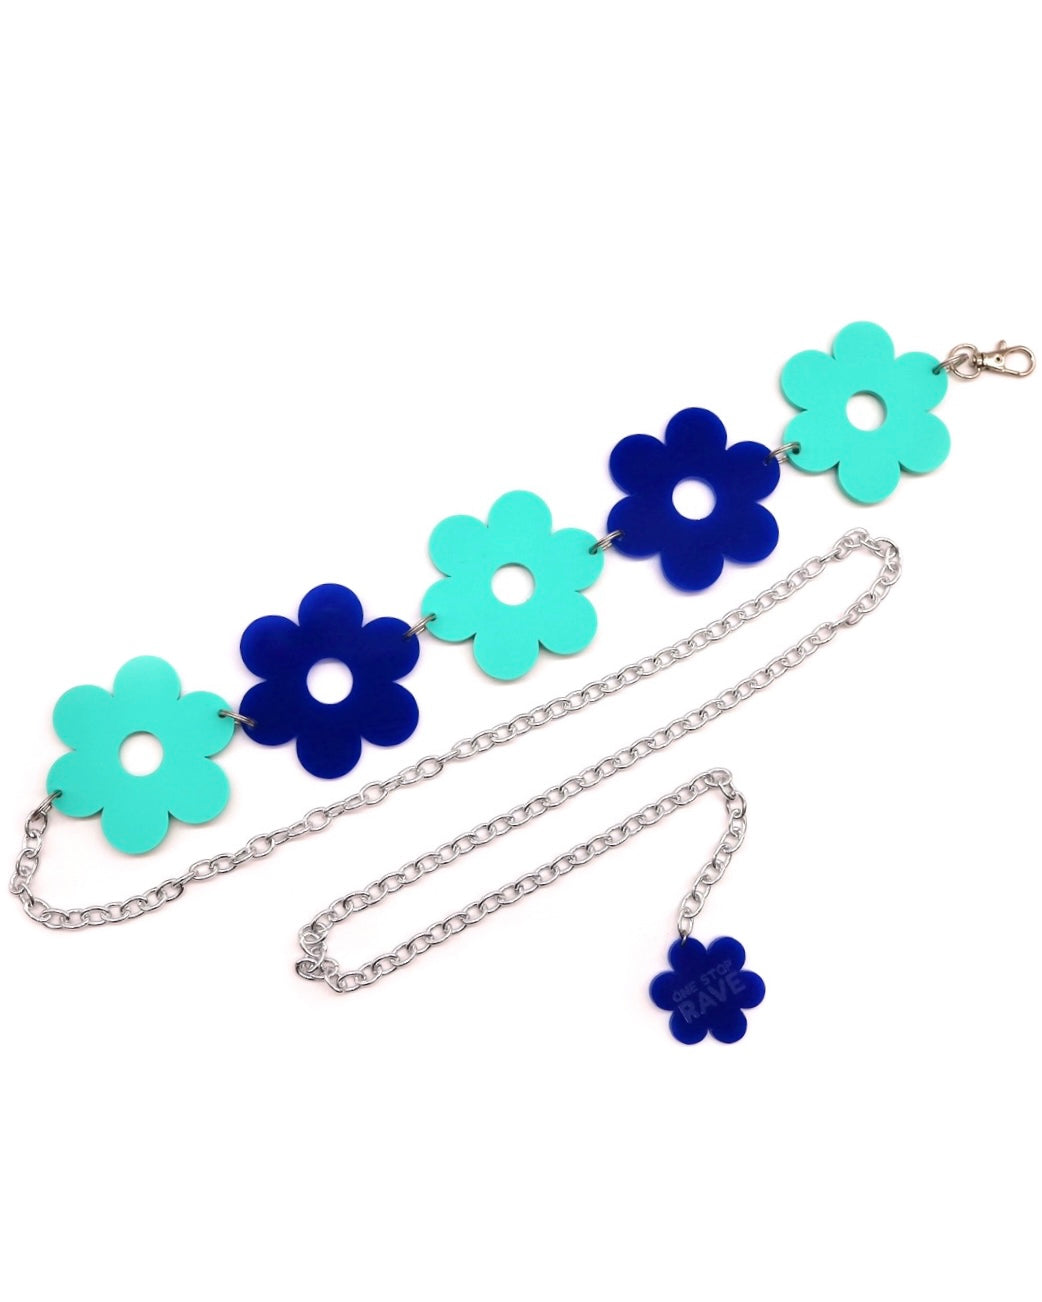 Flower Power Blue Belt featuring a silver chain with alternating blue and teal acrylic daisies.